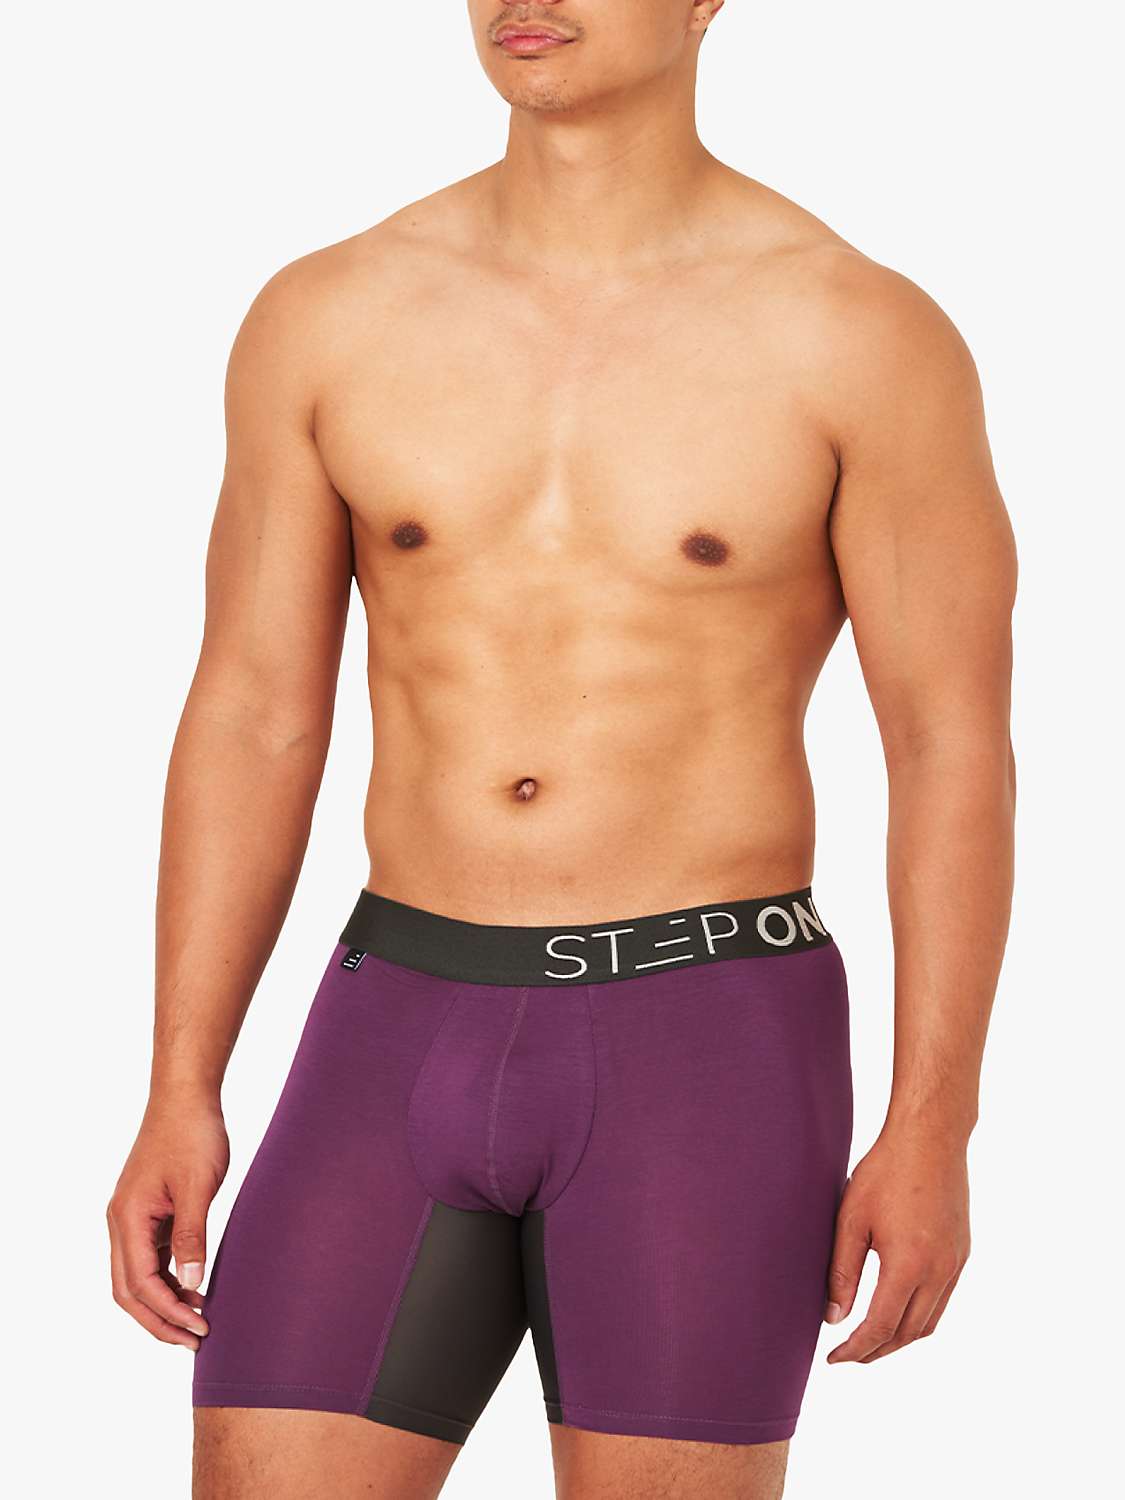 Buy Step One Bamboo Trunks, Pack of 5 Online at johnlewis.com